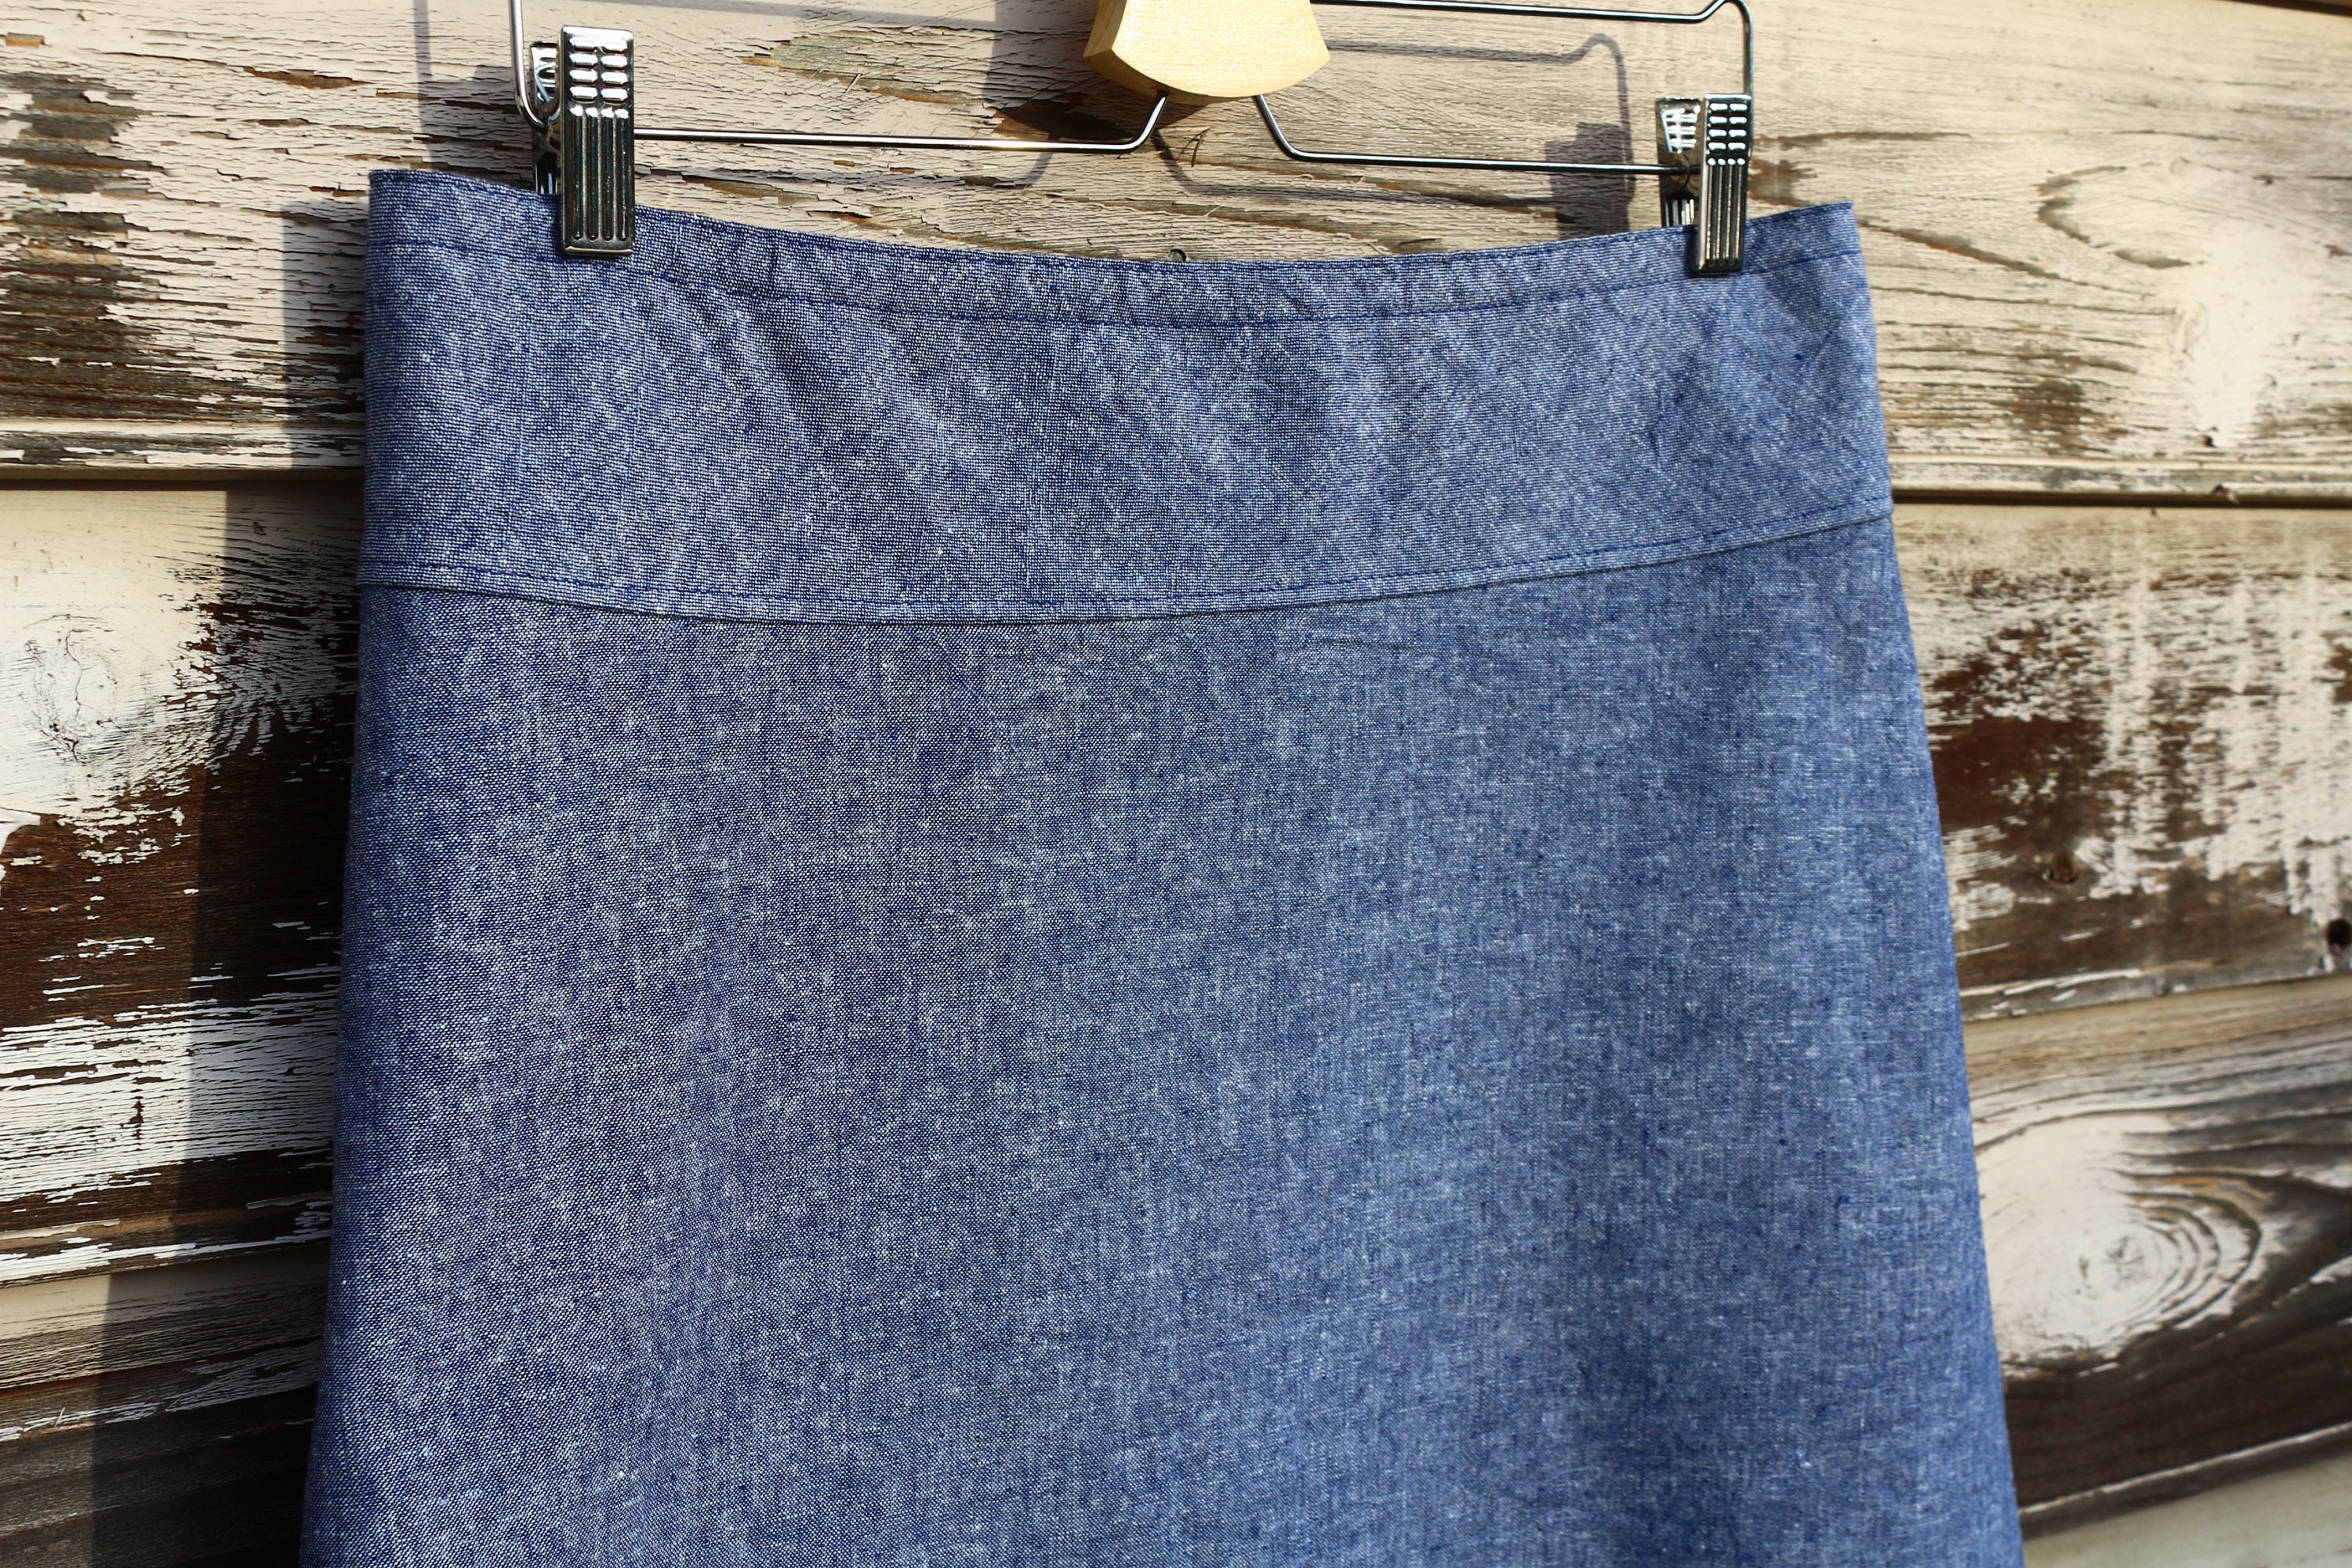 Cotton Linen Blend in Denim A-Line Skirt, Simple Modern More Colors Availible, Custom Made, You Choose Fitted, Comfy, Loose